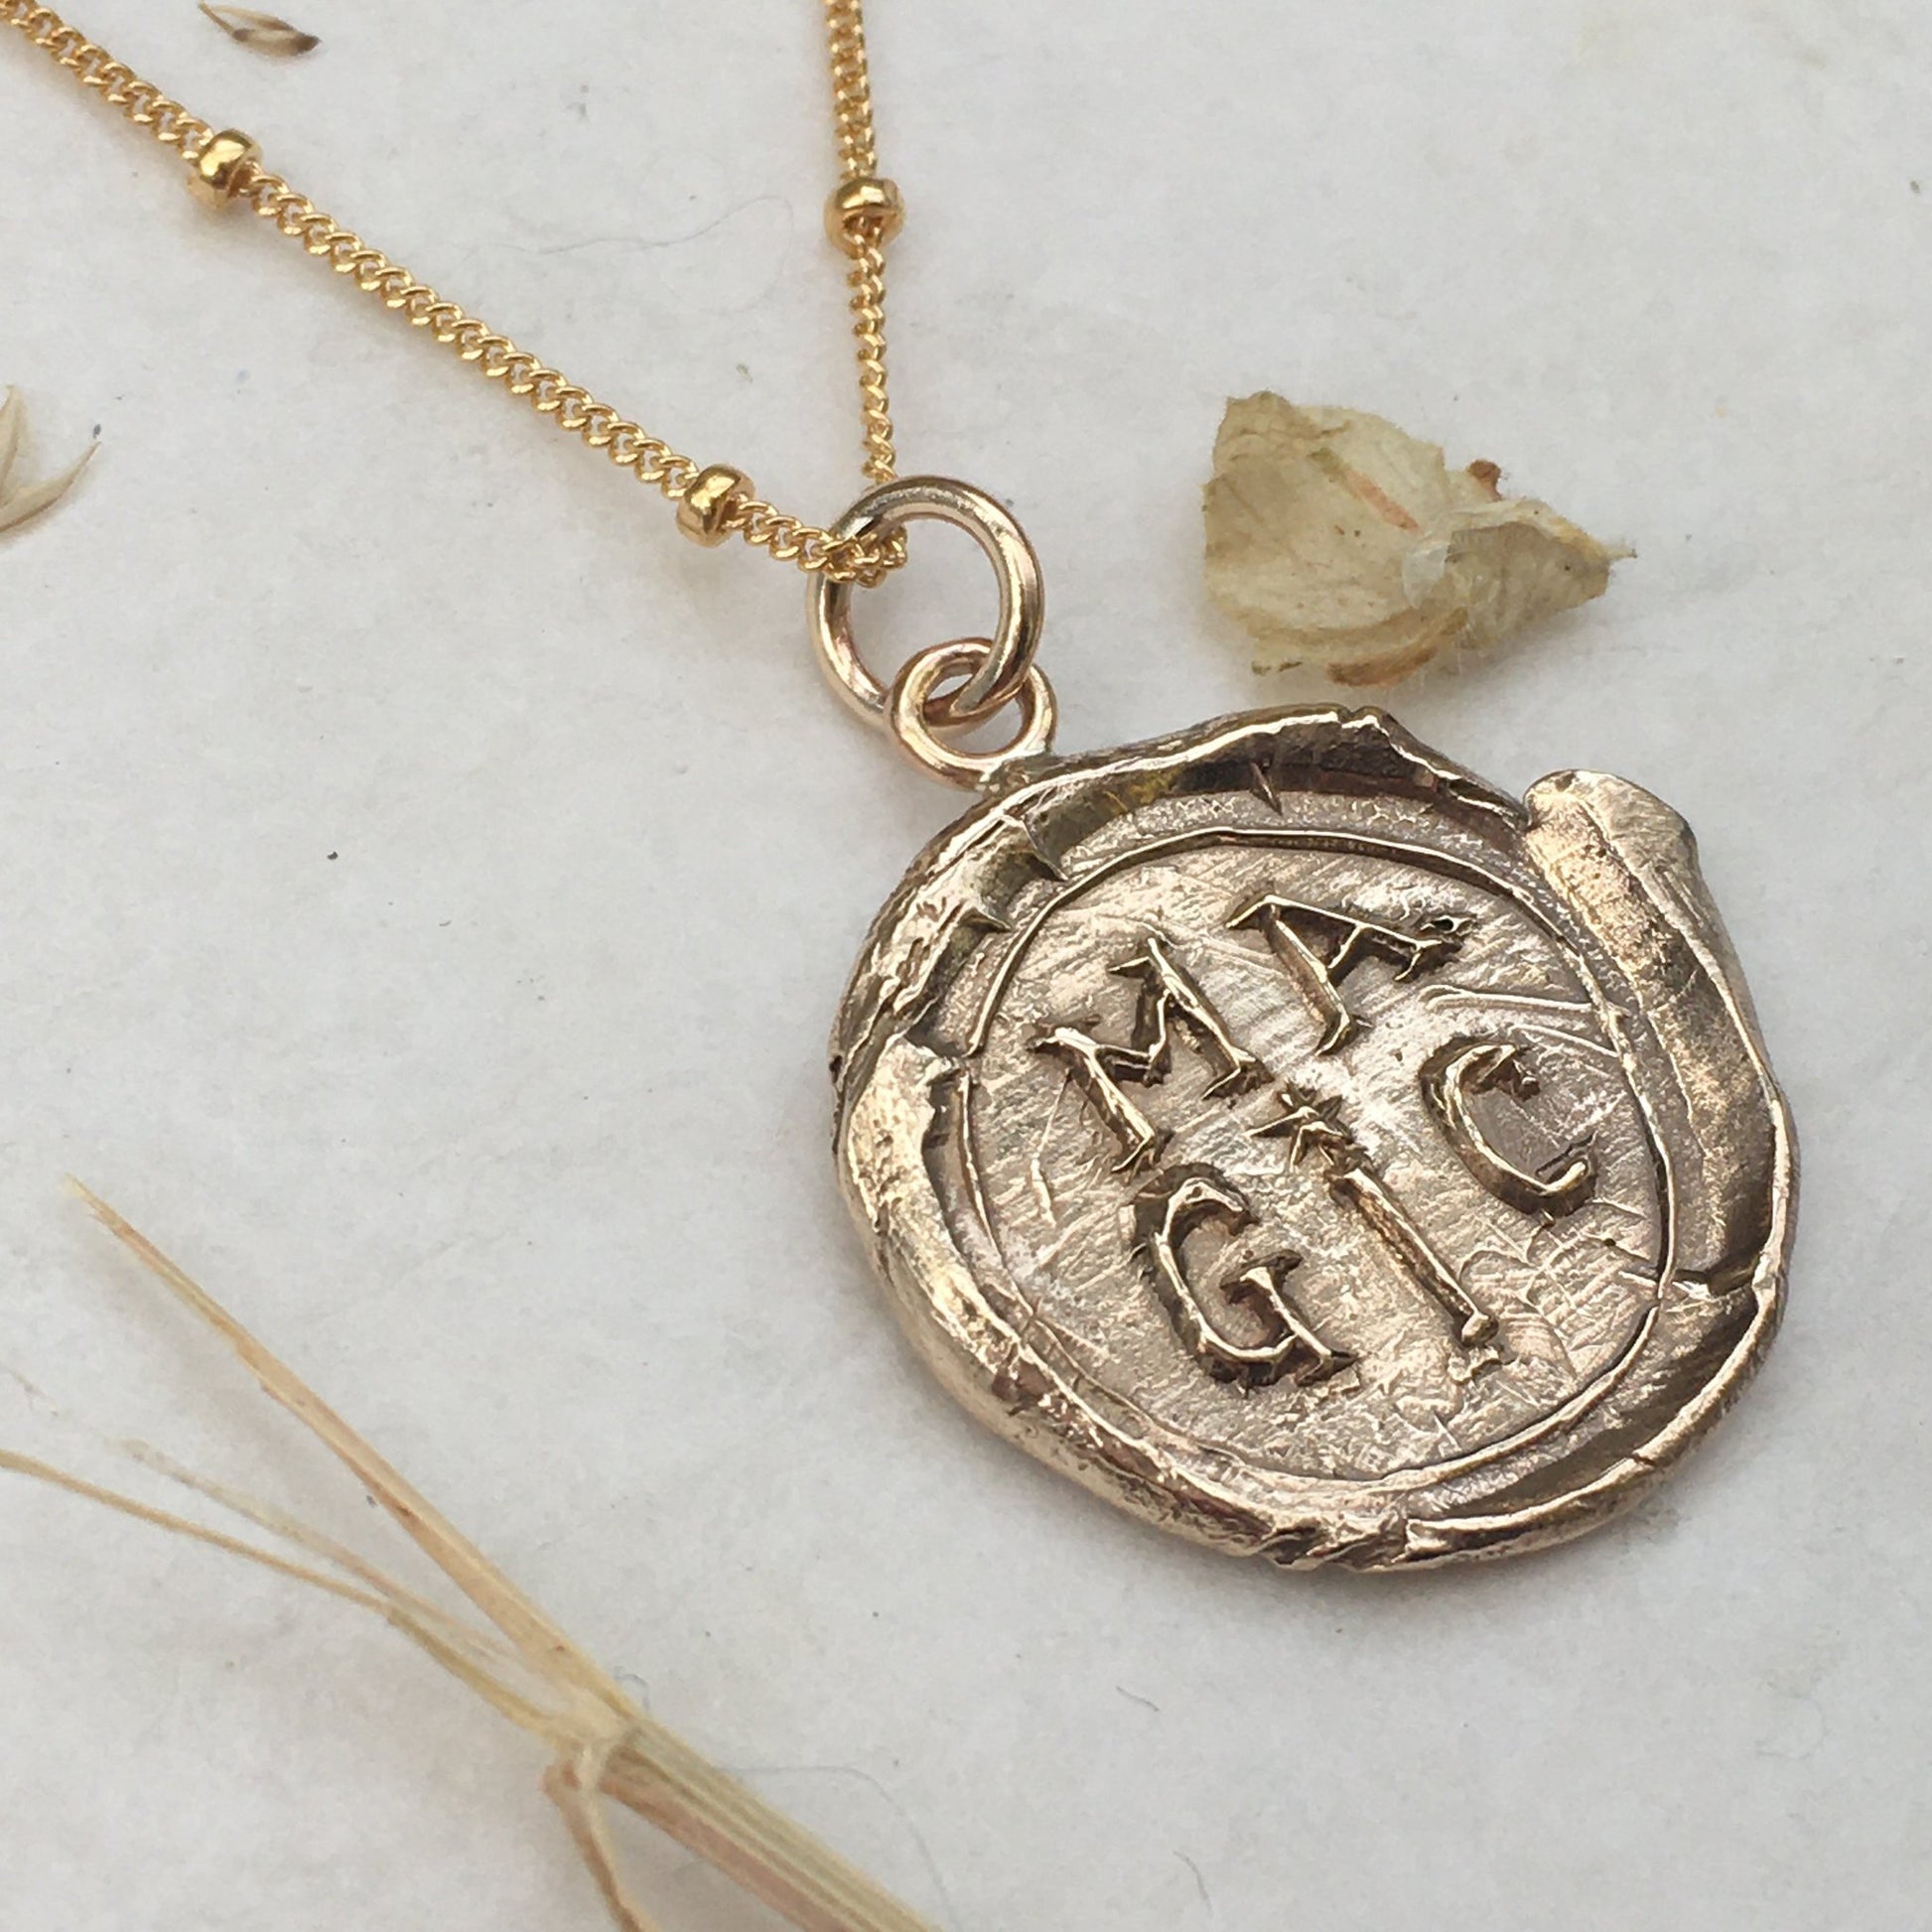 MAGIC Coin Necklace Bronze - The Bristol Artisan Handmade Sustainable Gifts and Homewares.